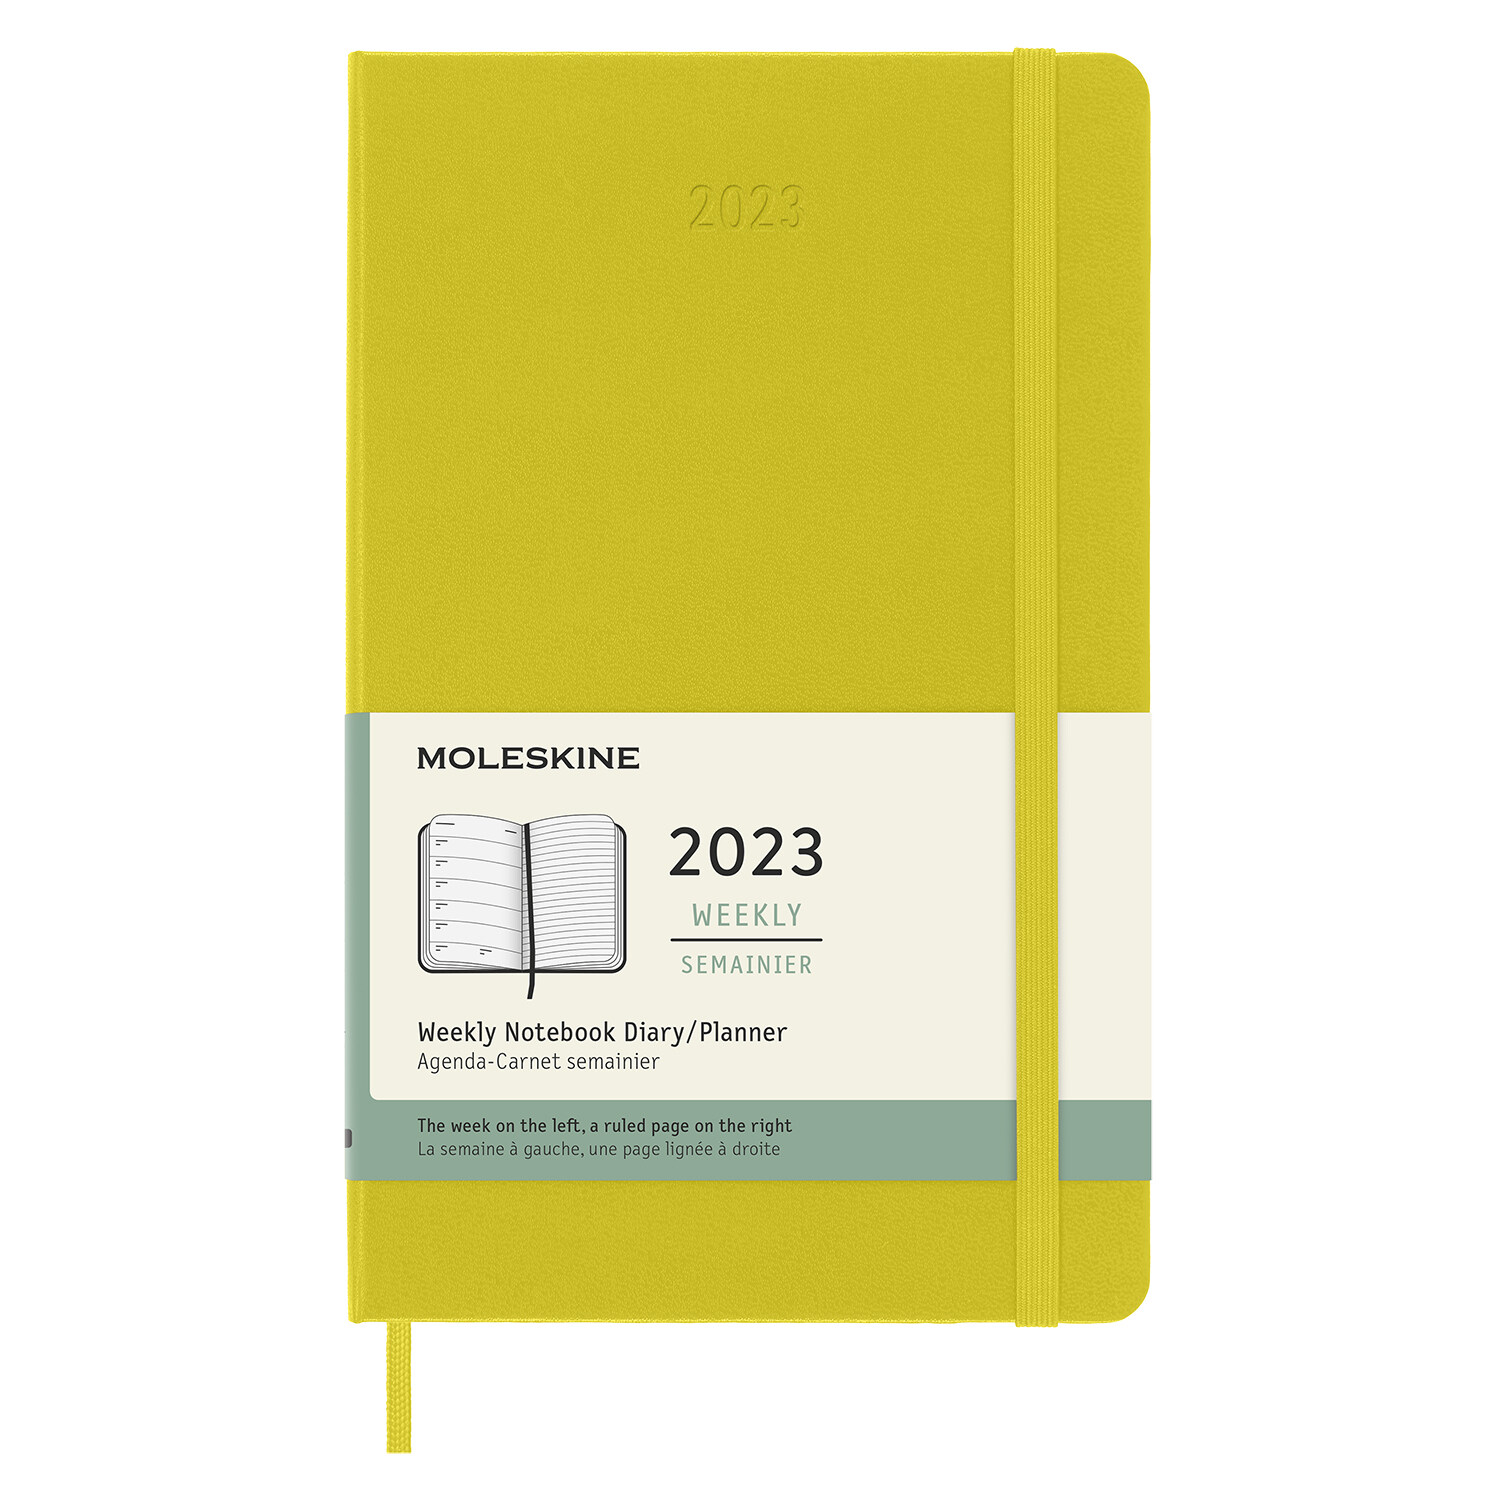 Moleskine 2023 Weekly Notebook Planner, 12m, Large, Hay Yellow, Hard Cover (5 X 8.25) (Other)